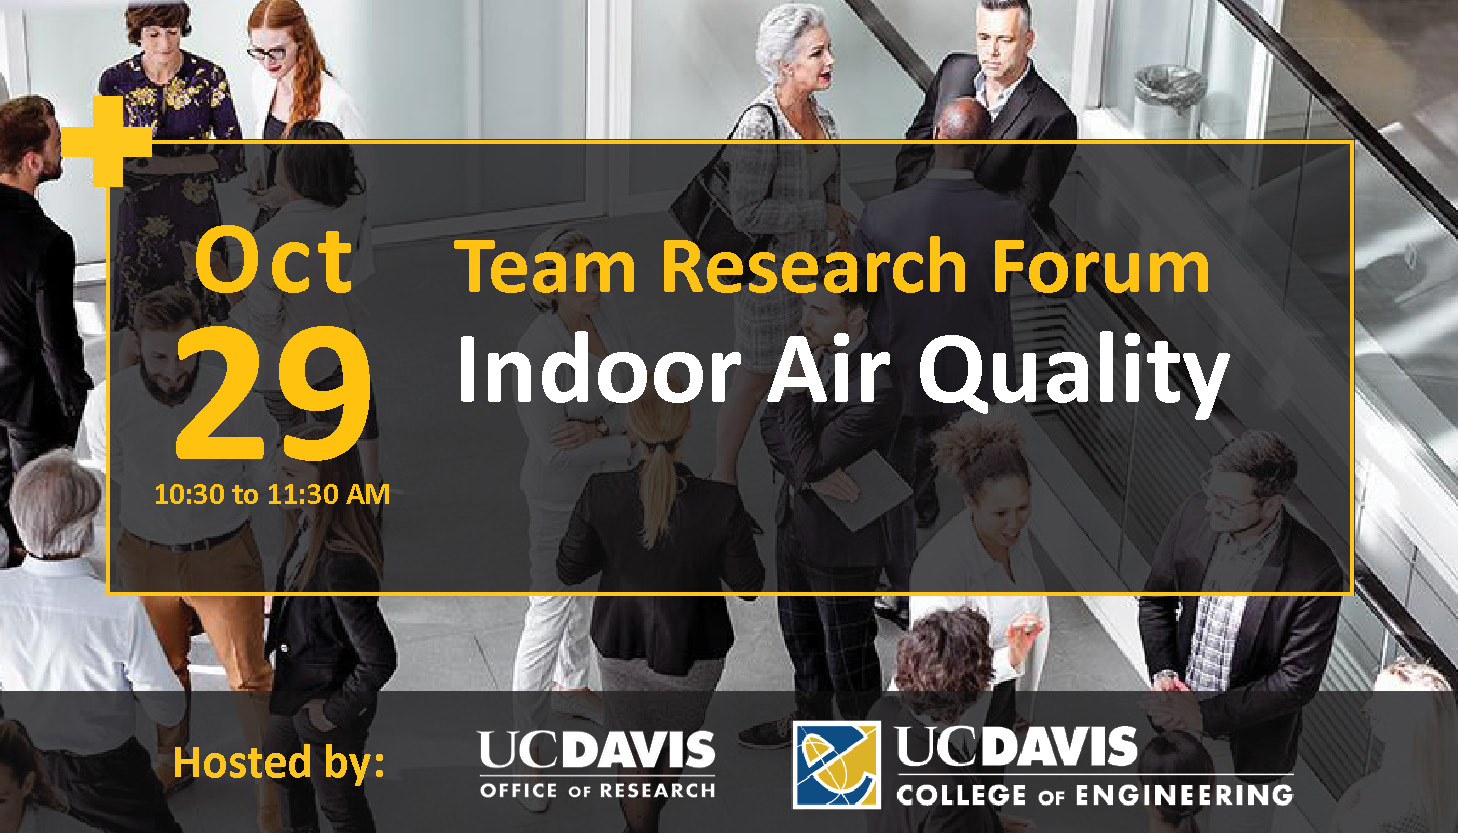 event details, team research forum: indoor air quality takes place october 29 10:30 to 11:30 am